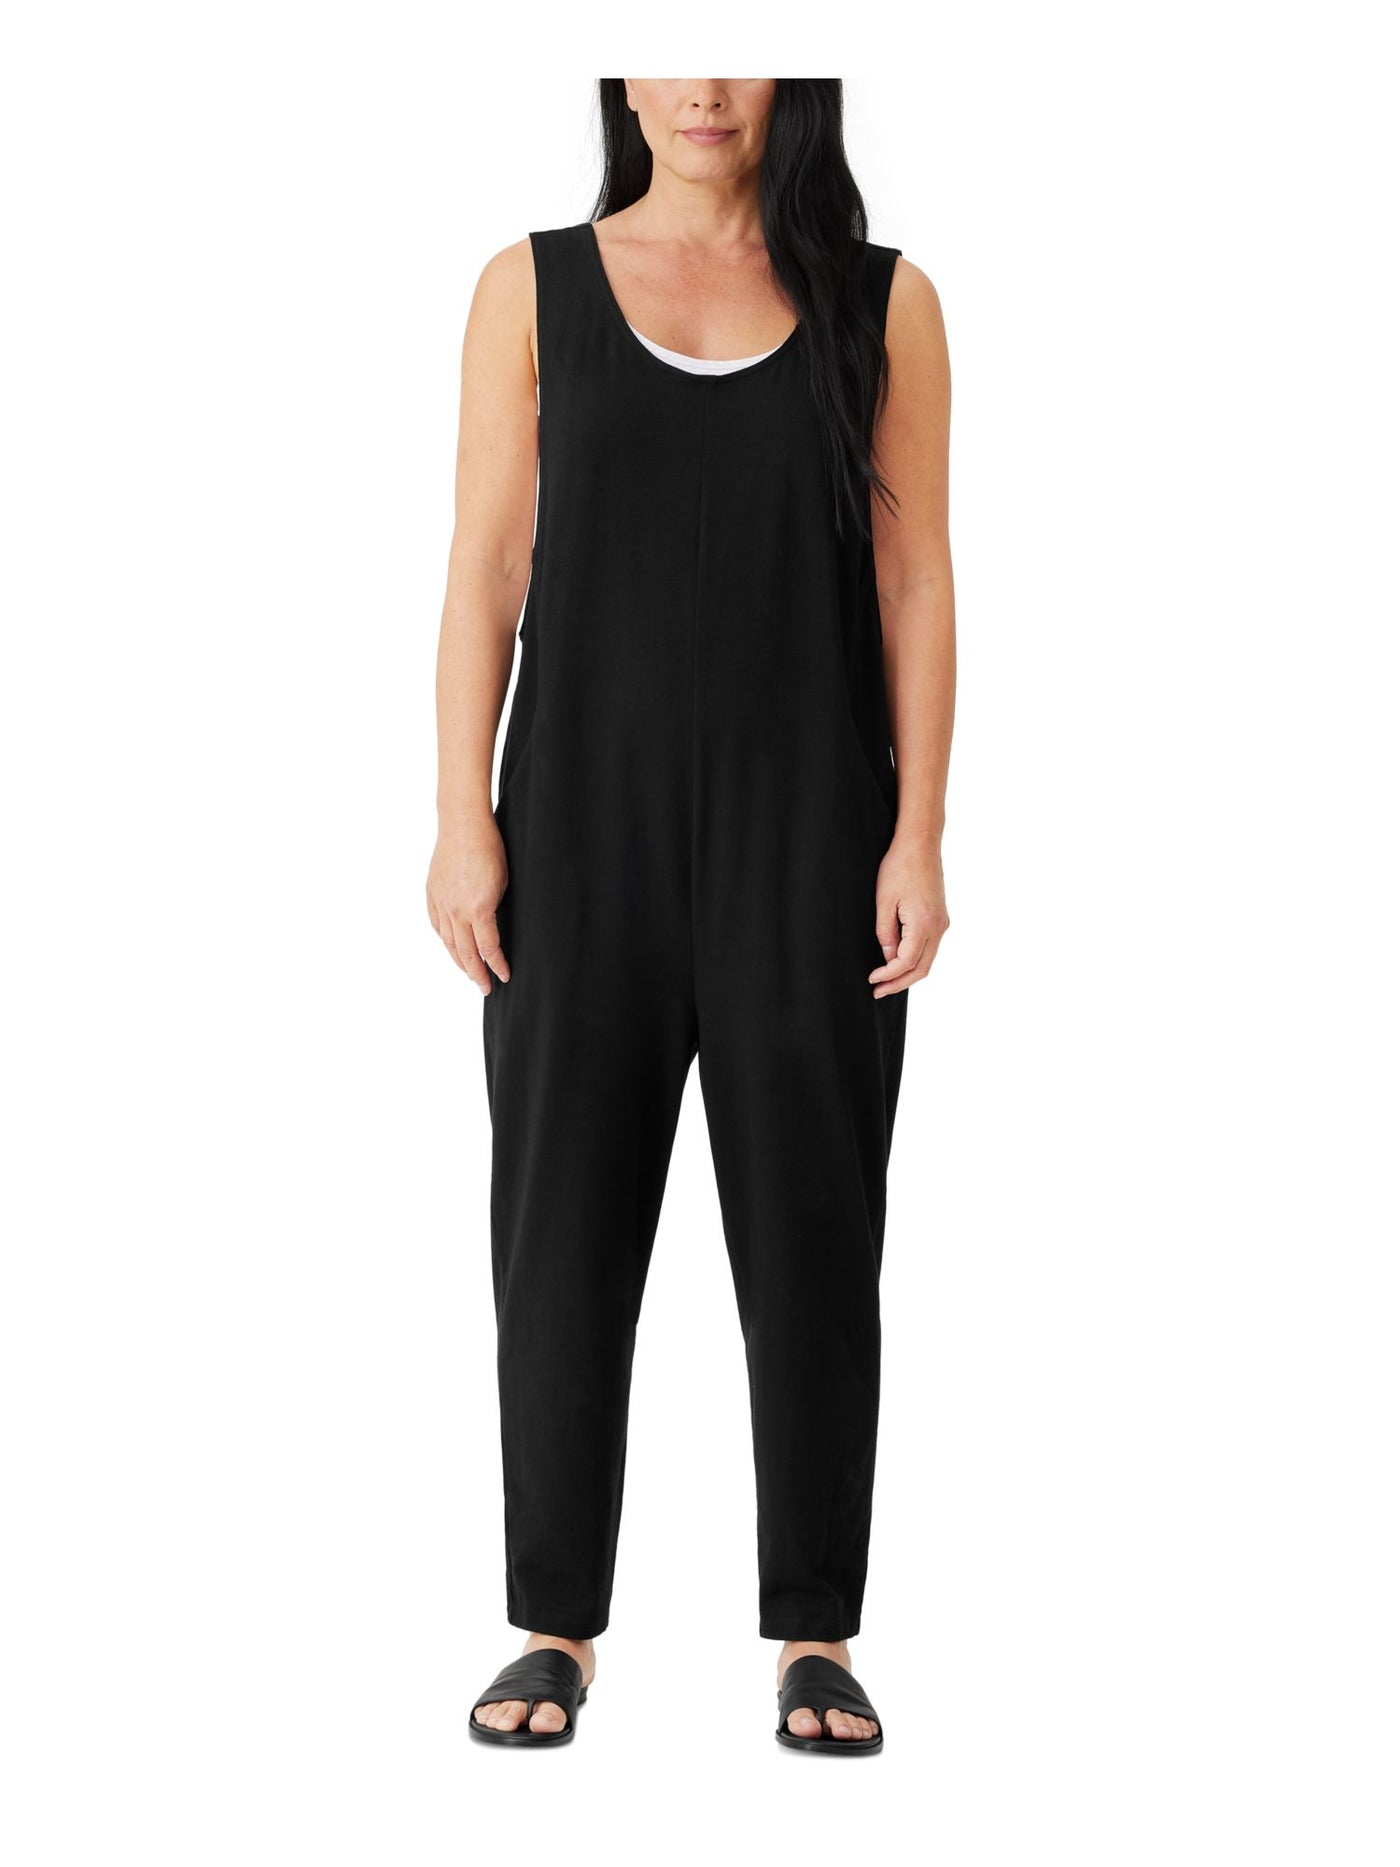 EILEEN FISHER Womens Black Pocketed Relaxed Fit Sleeveless Scoop Neck Straight leg Jumpsuit Petites PP